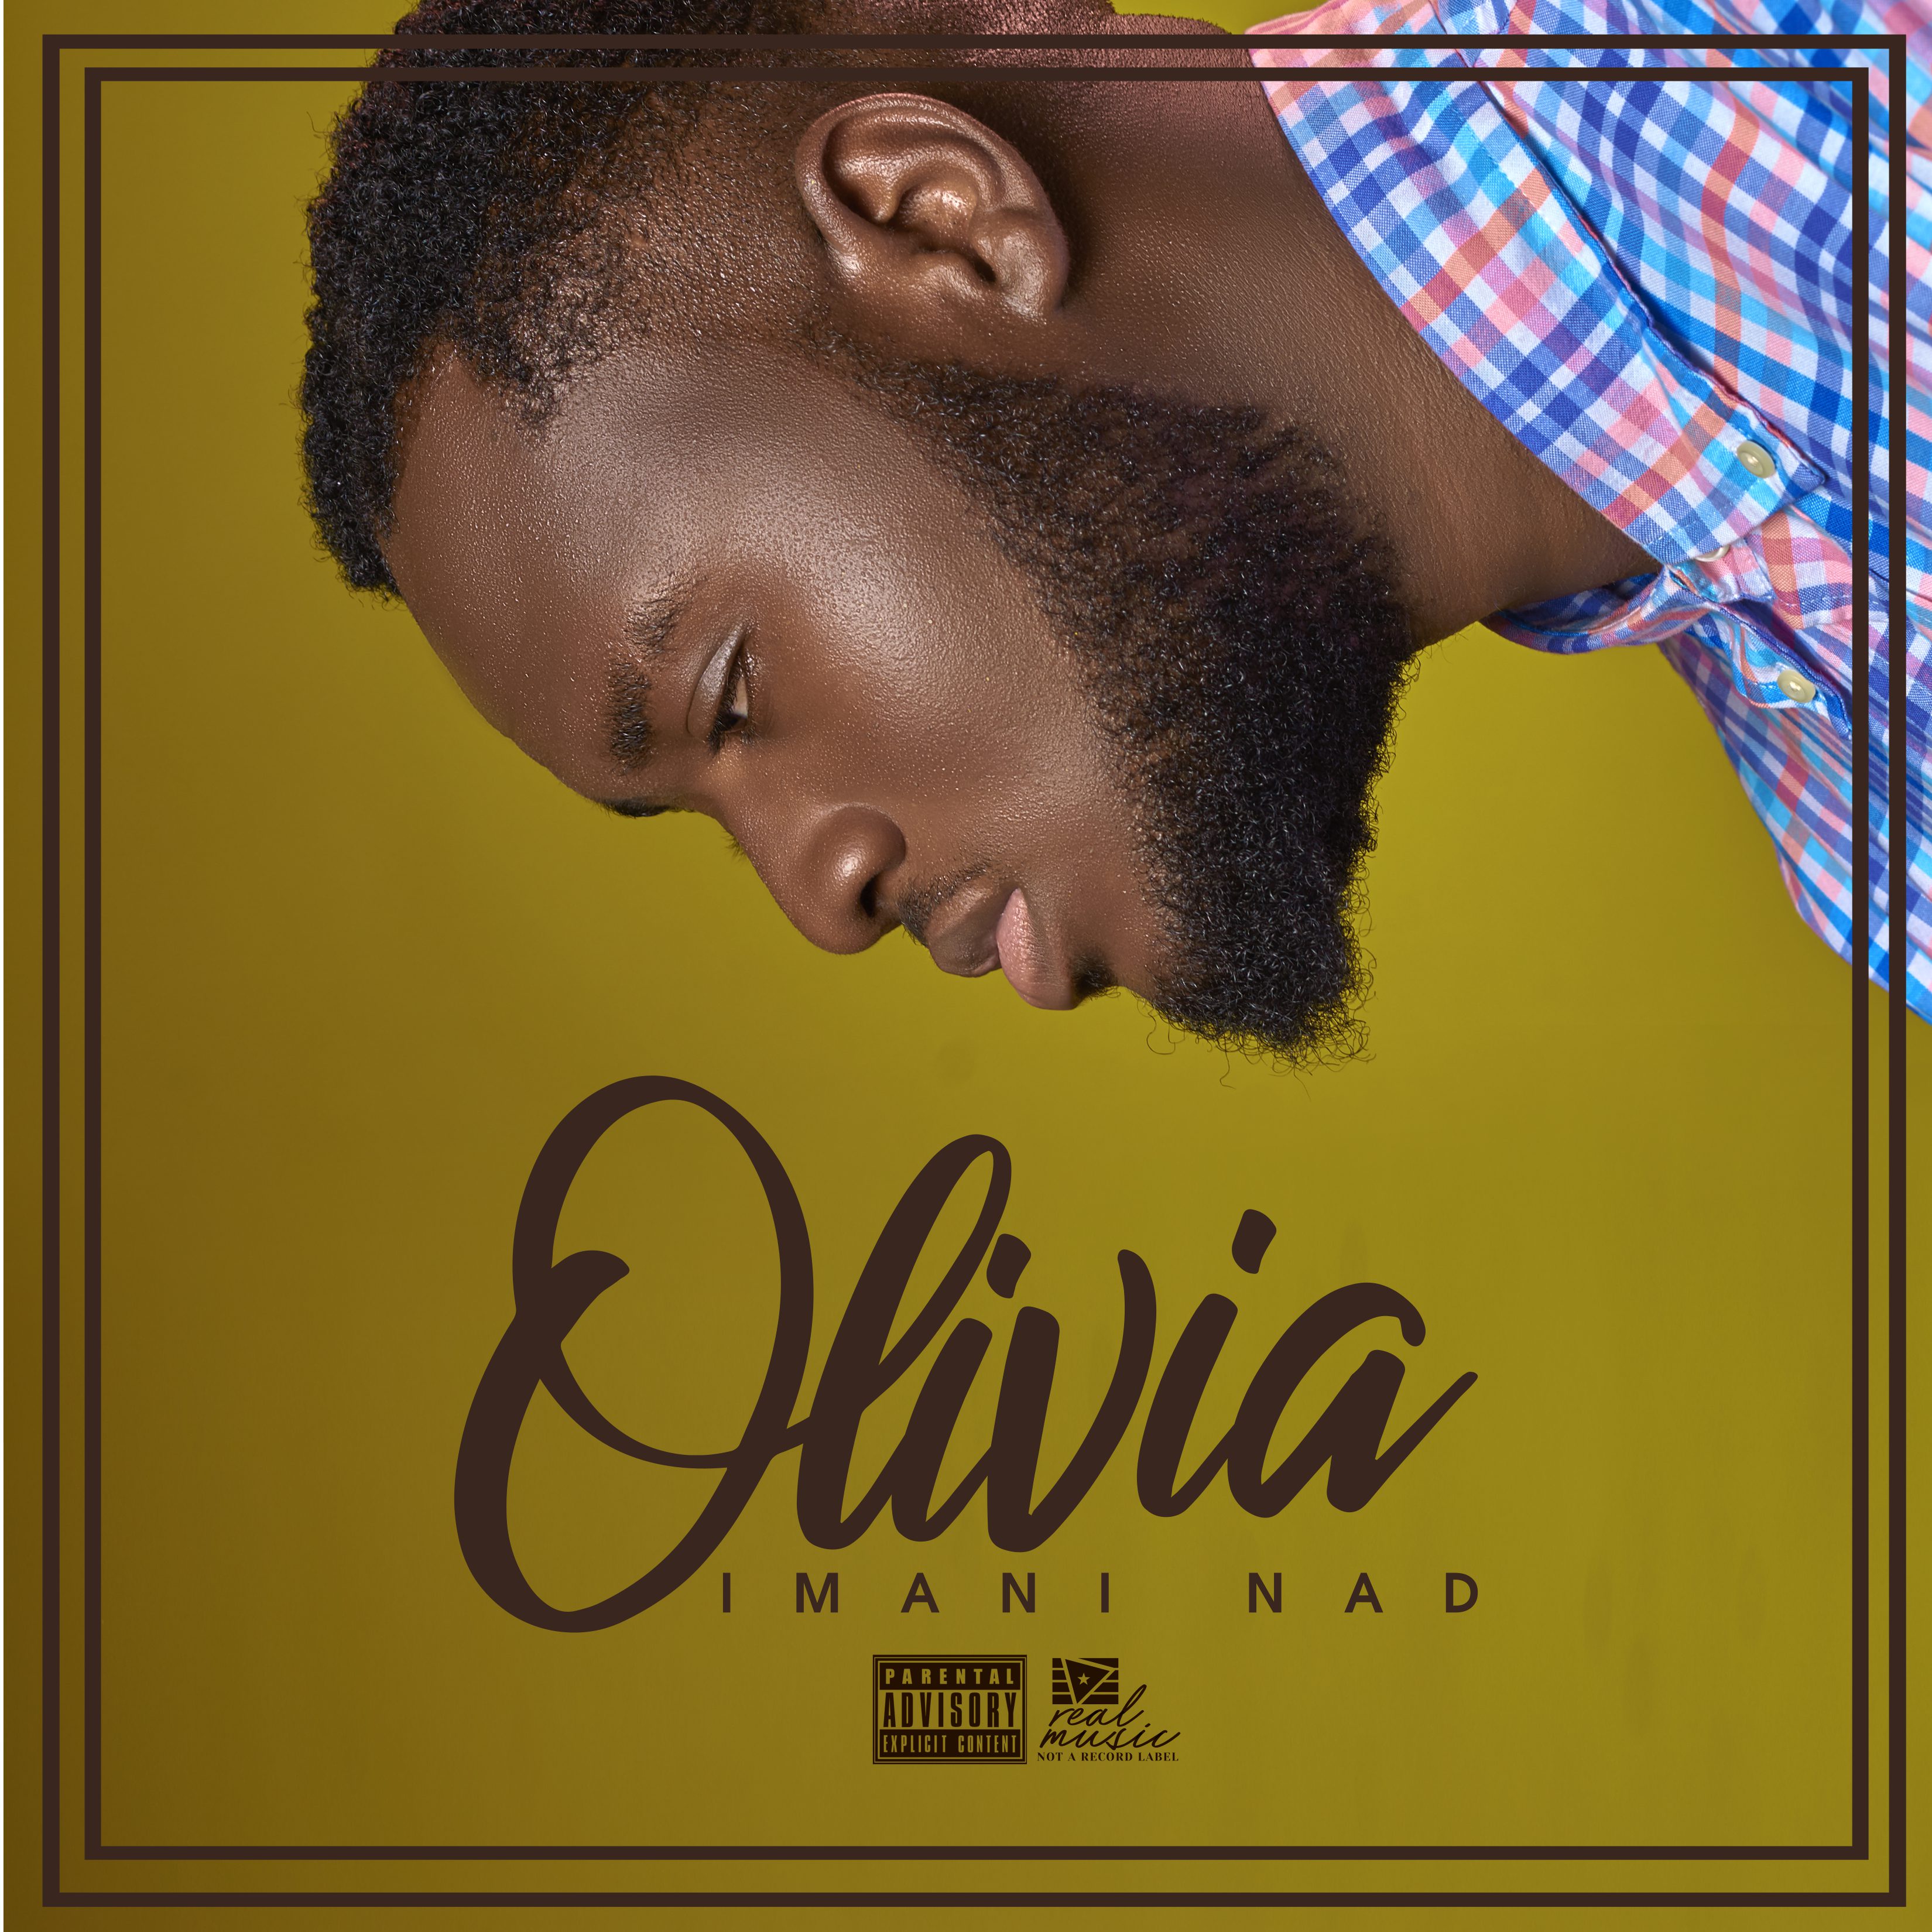 Imani N.A.D finally releases “OLIVIA”